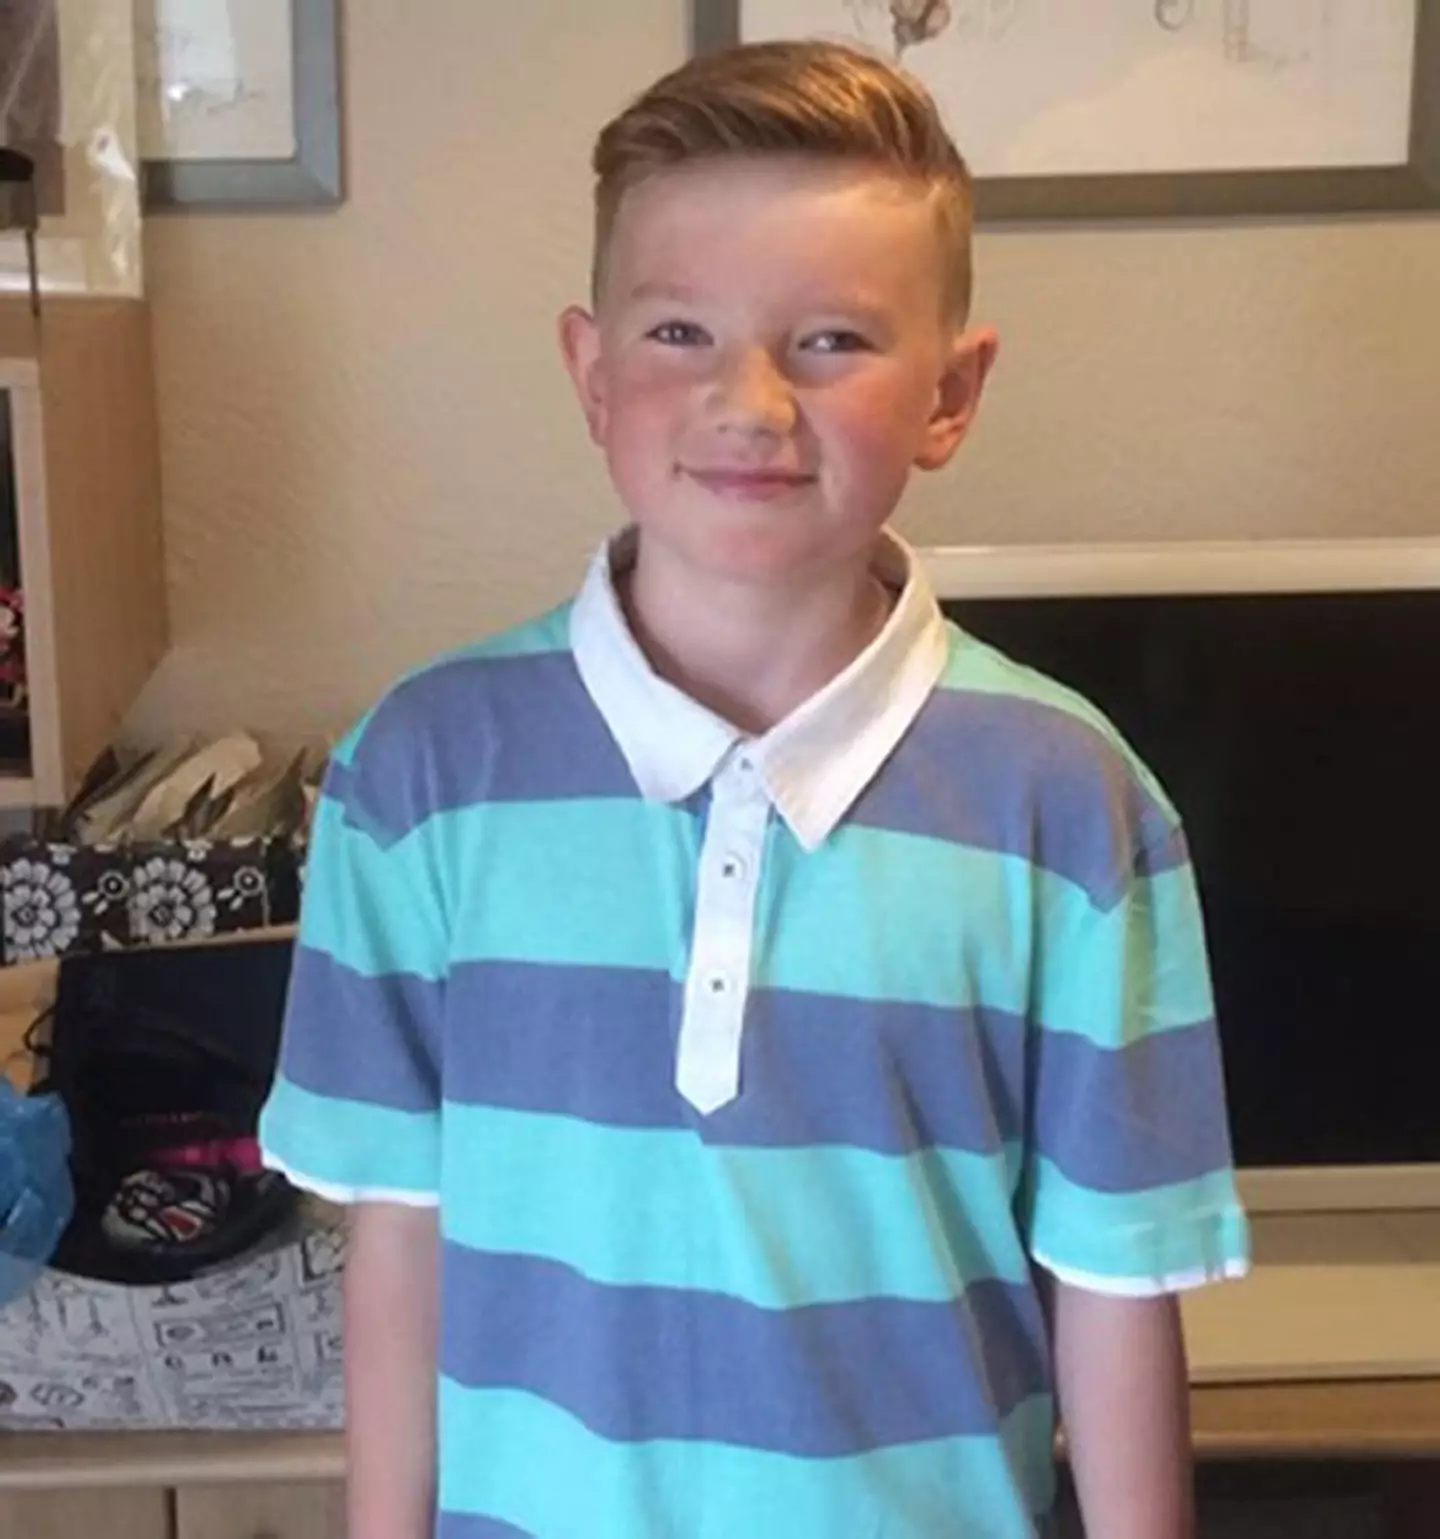 Alex Batty, from Oldham, Greater Manchester, was just 11 when he went missing in Spain in October 2017.